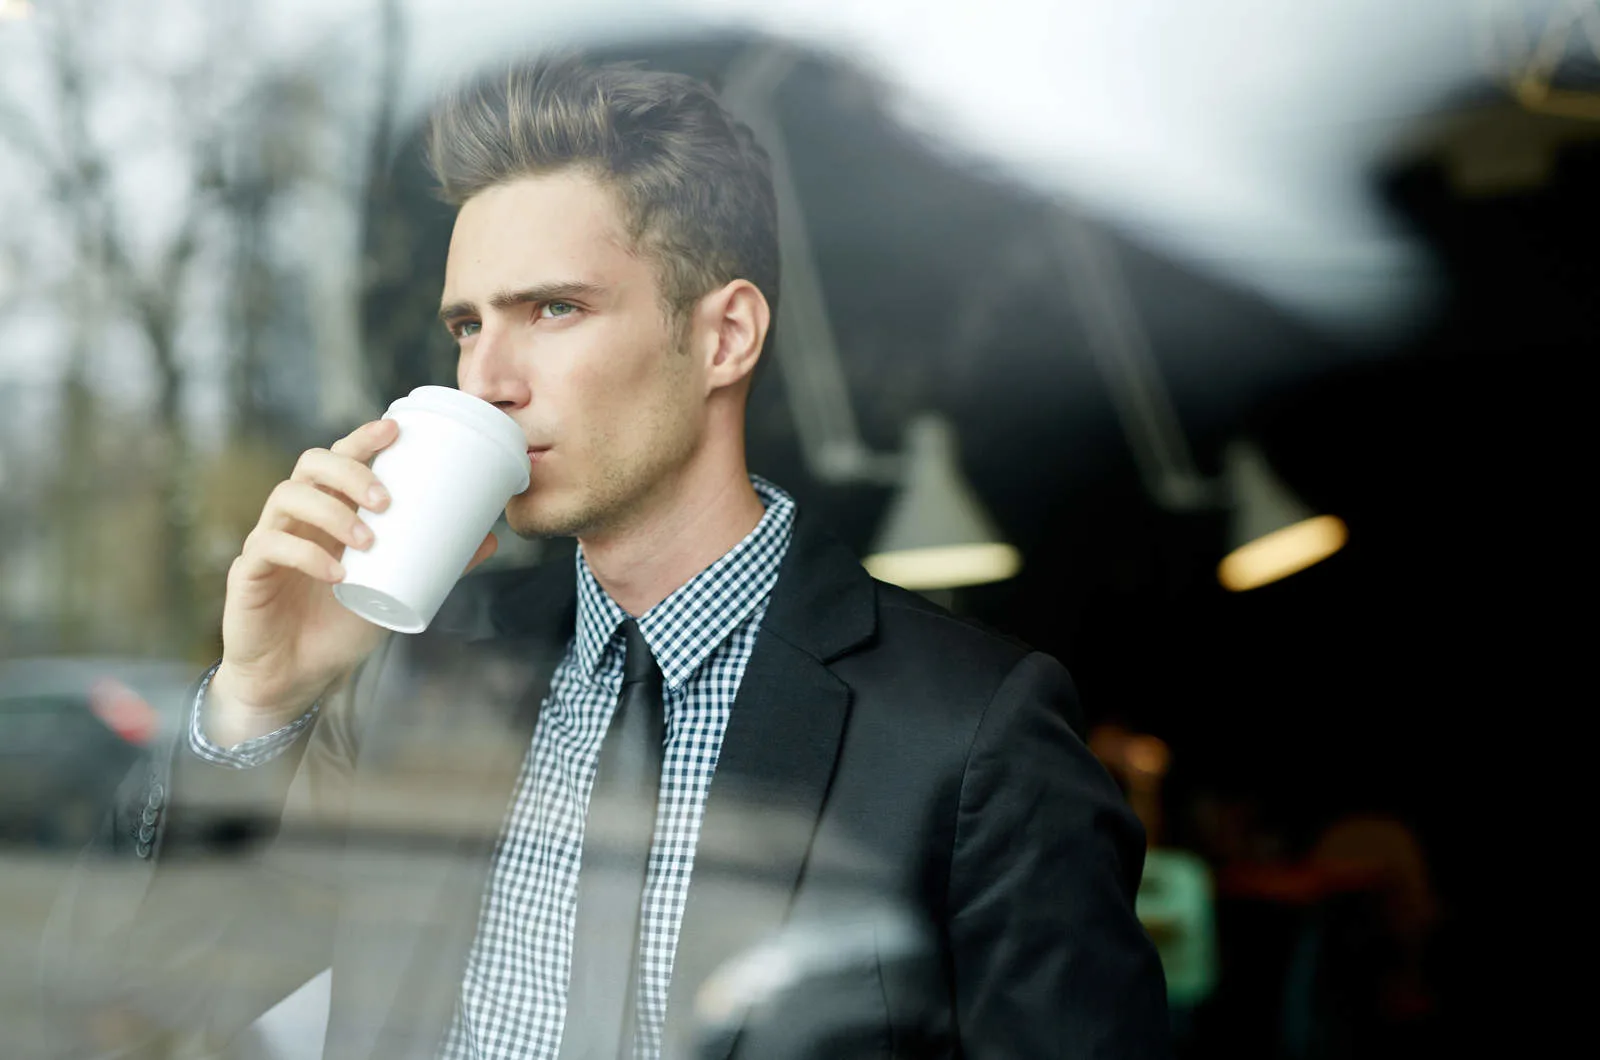 man drinking coffee and looking through window